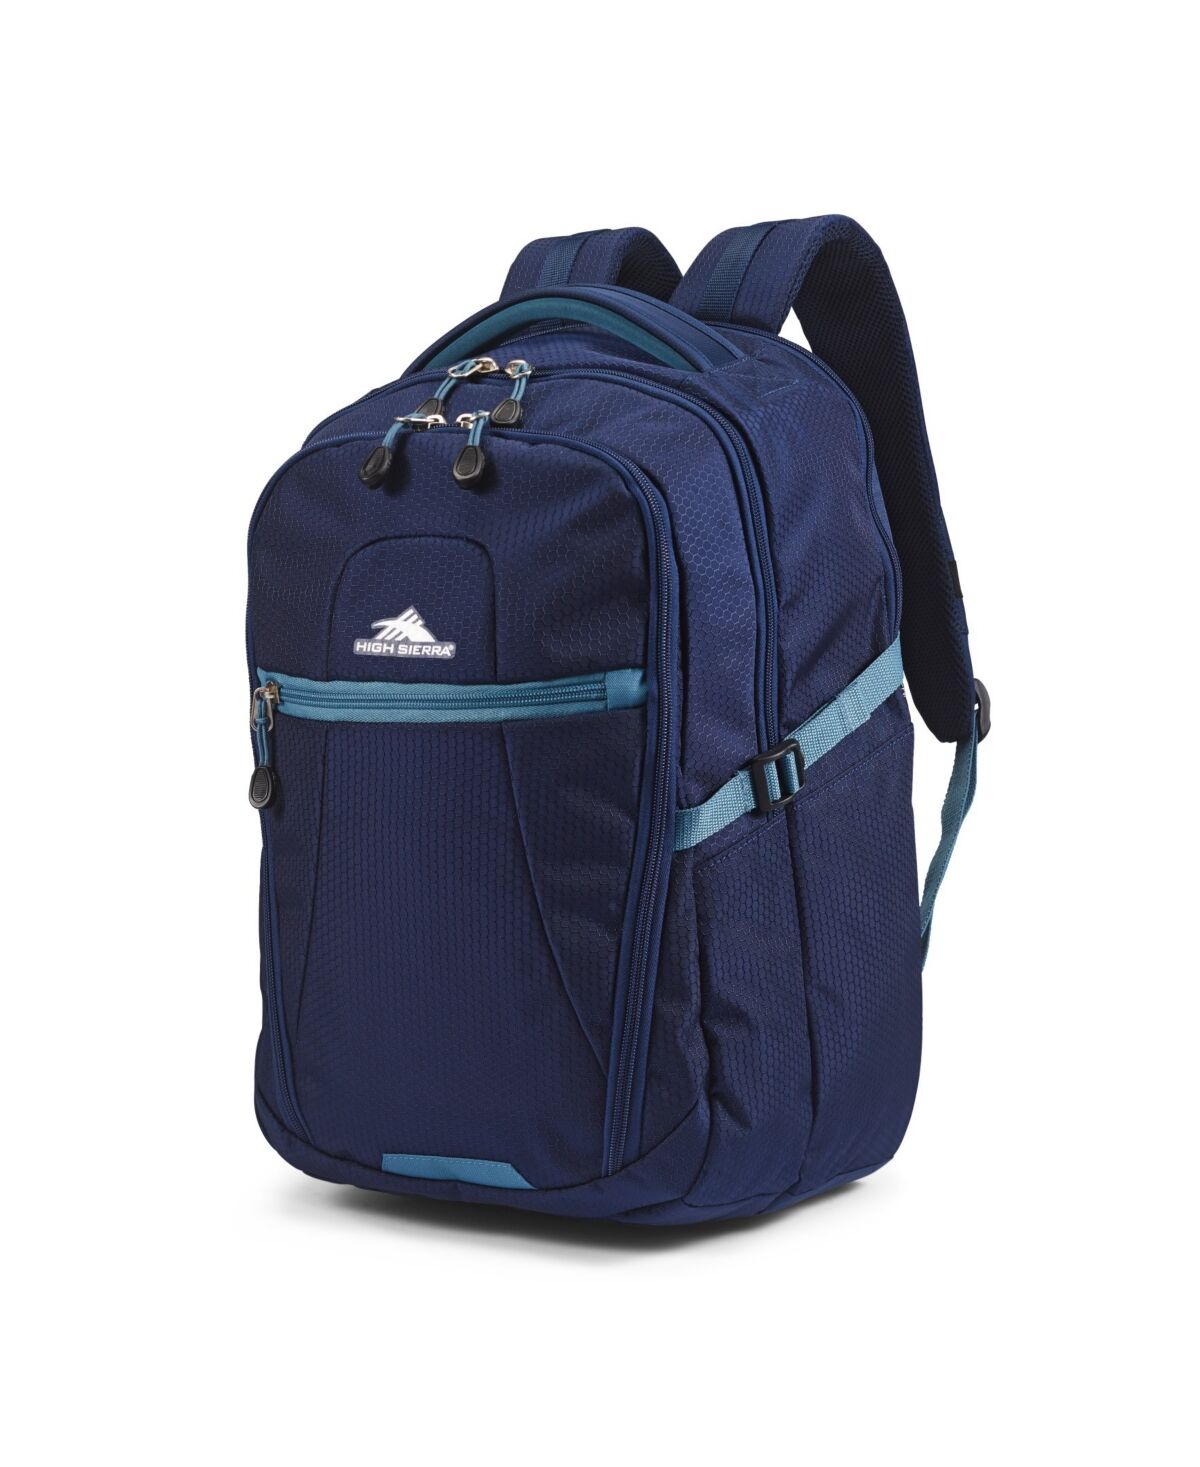 High Sierra Fairlead Computer Backpack - True Navy and Graphite Blue